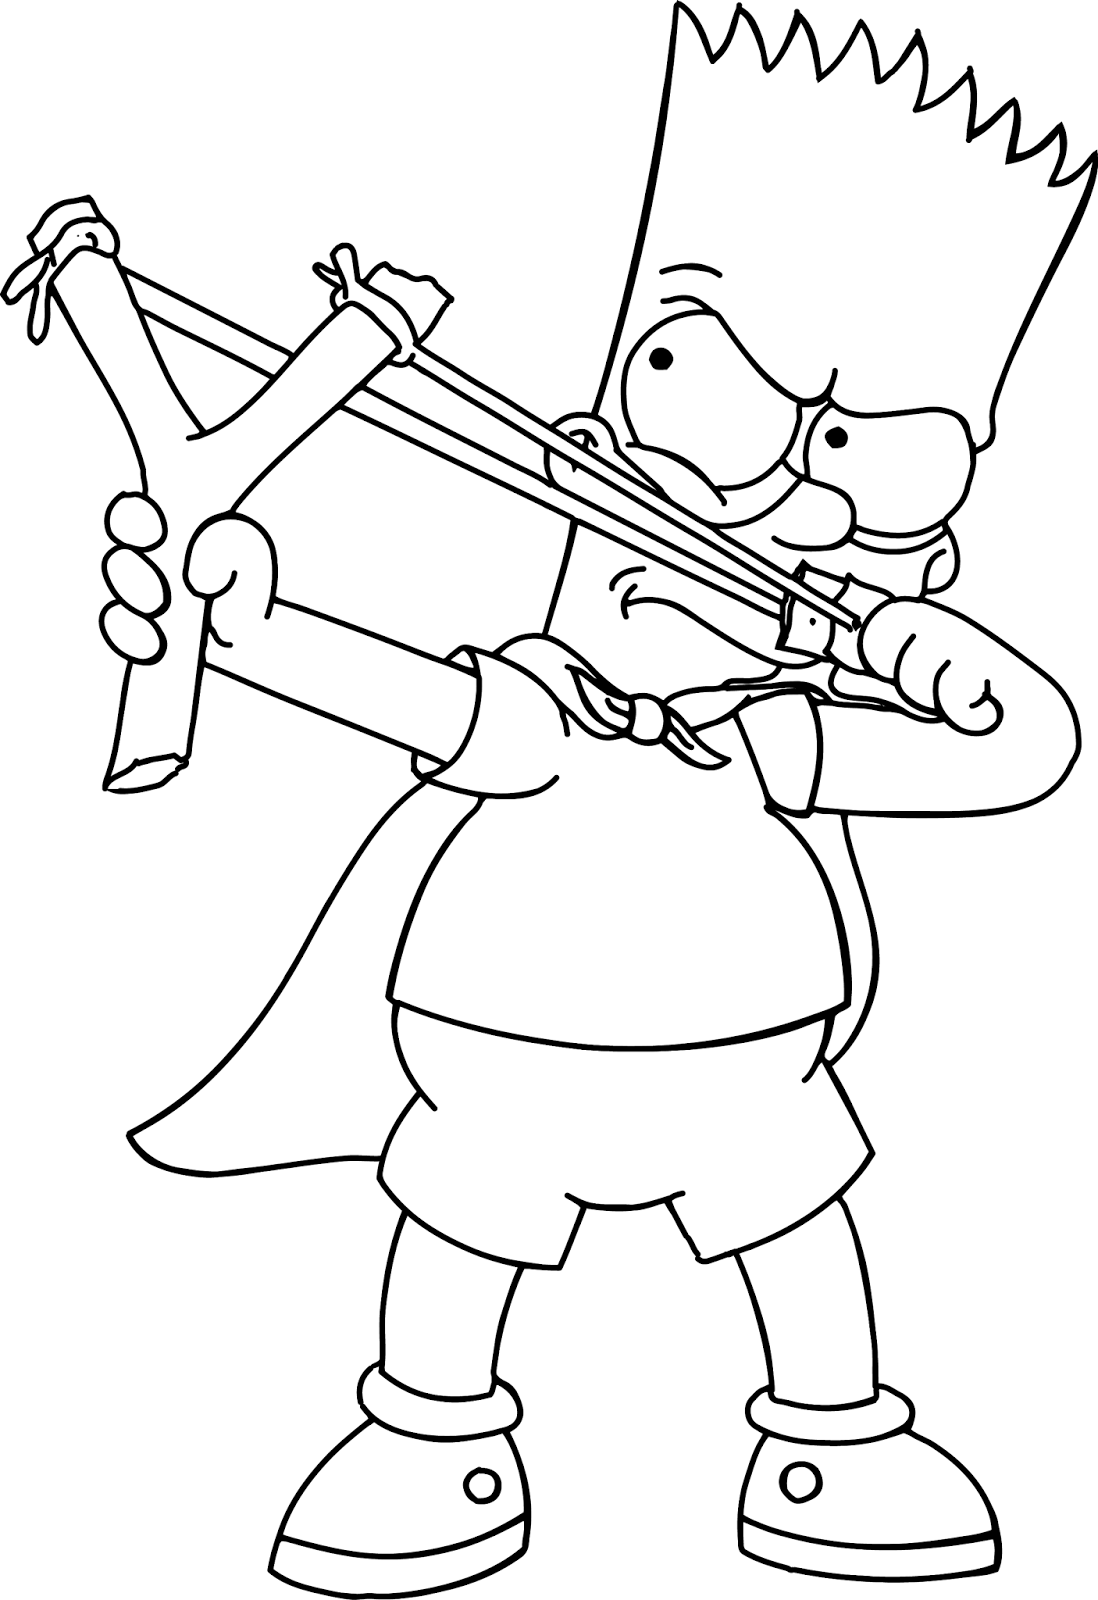 simpsons coloring pages to print